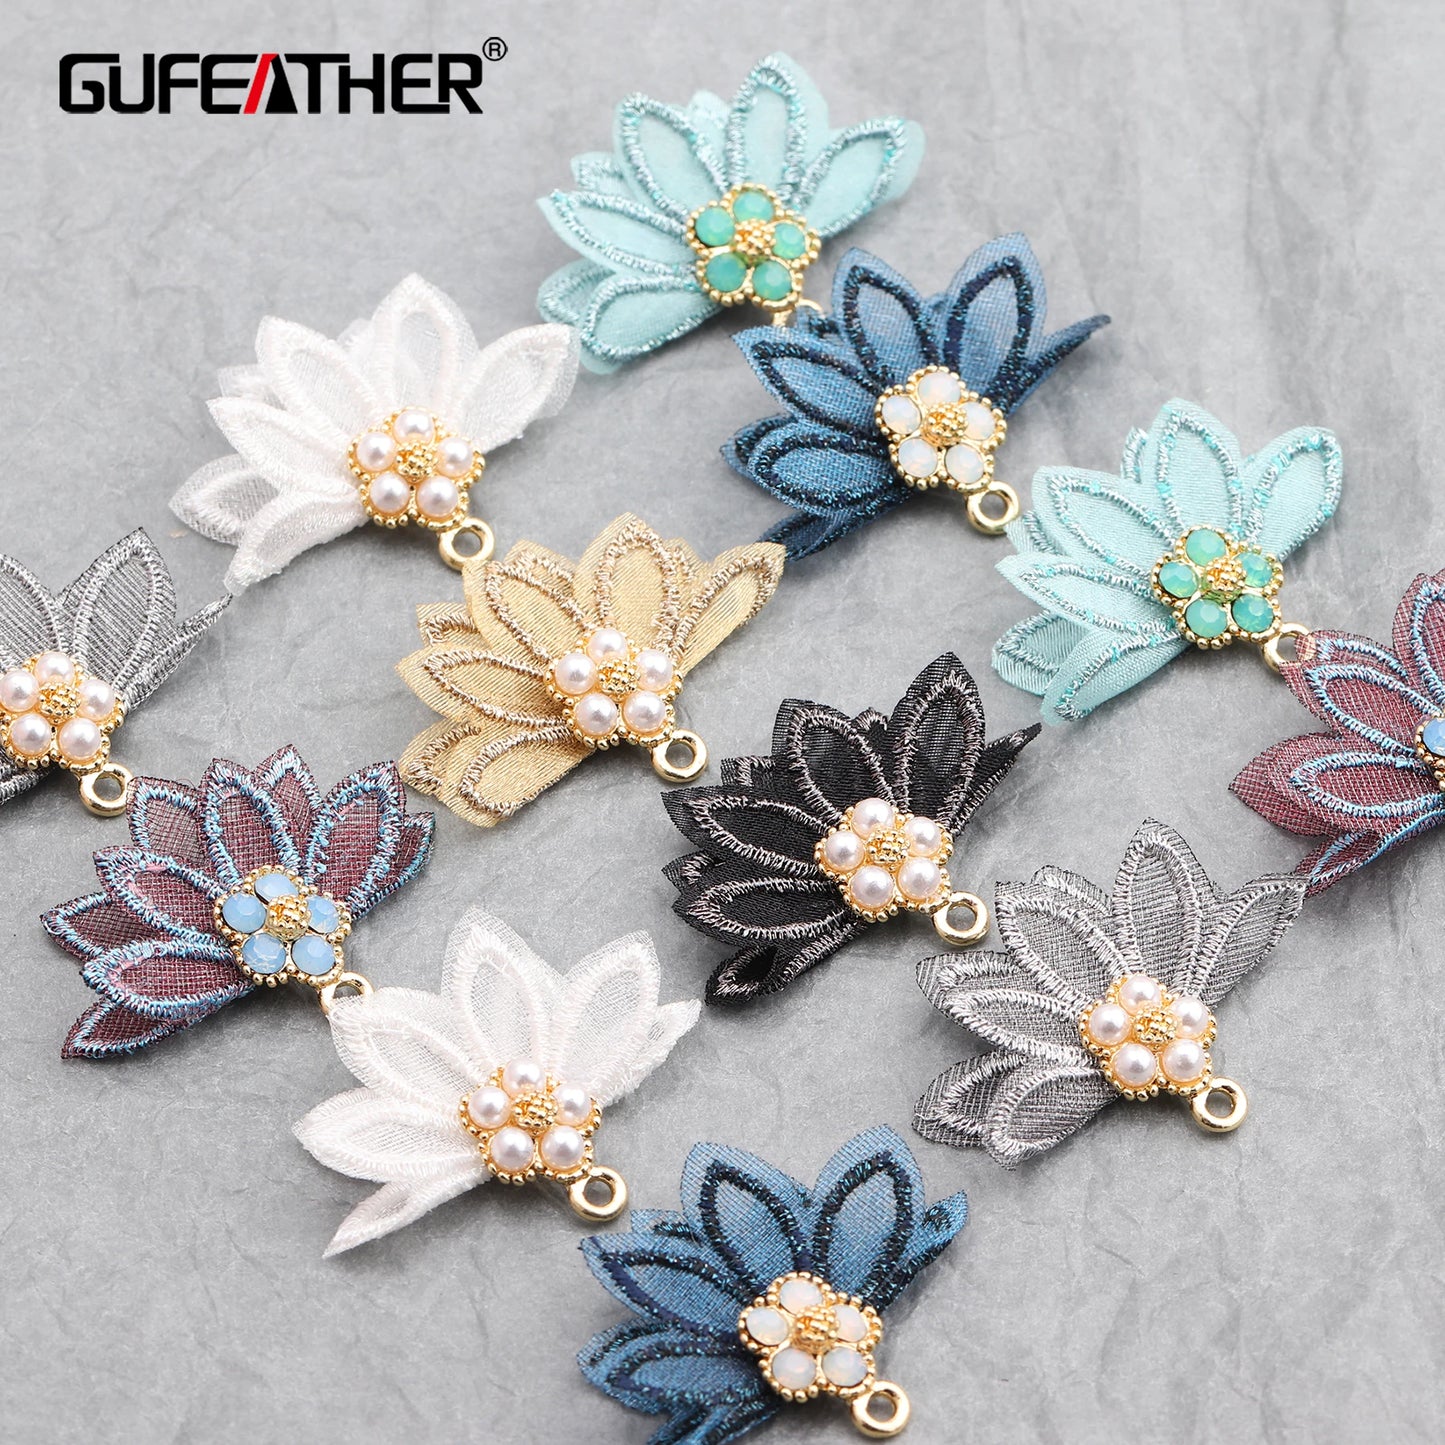 GUFEATHER M597,jewelry accessories,tassels,flower,hand made,jewelry making findings,charms,diy earring pendants,10pcs/lot